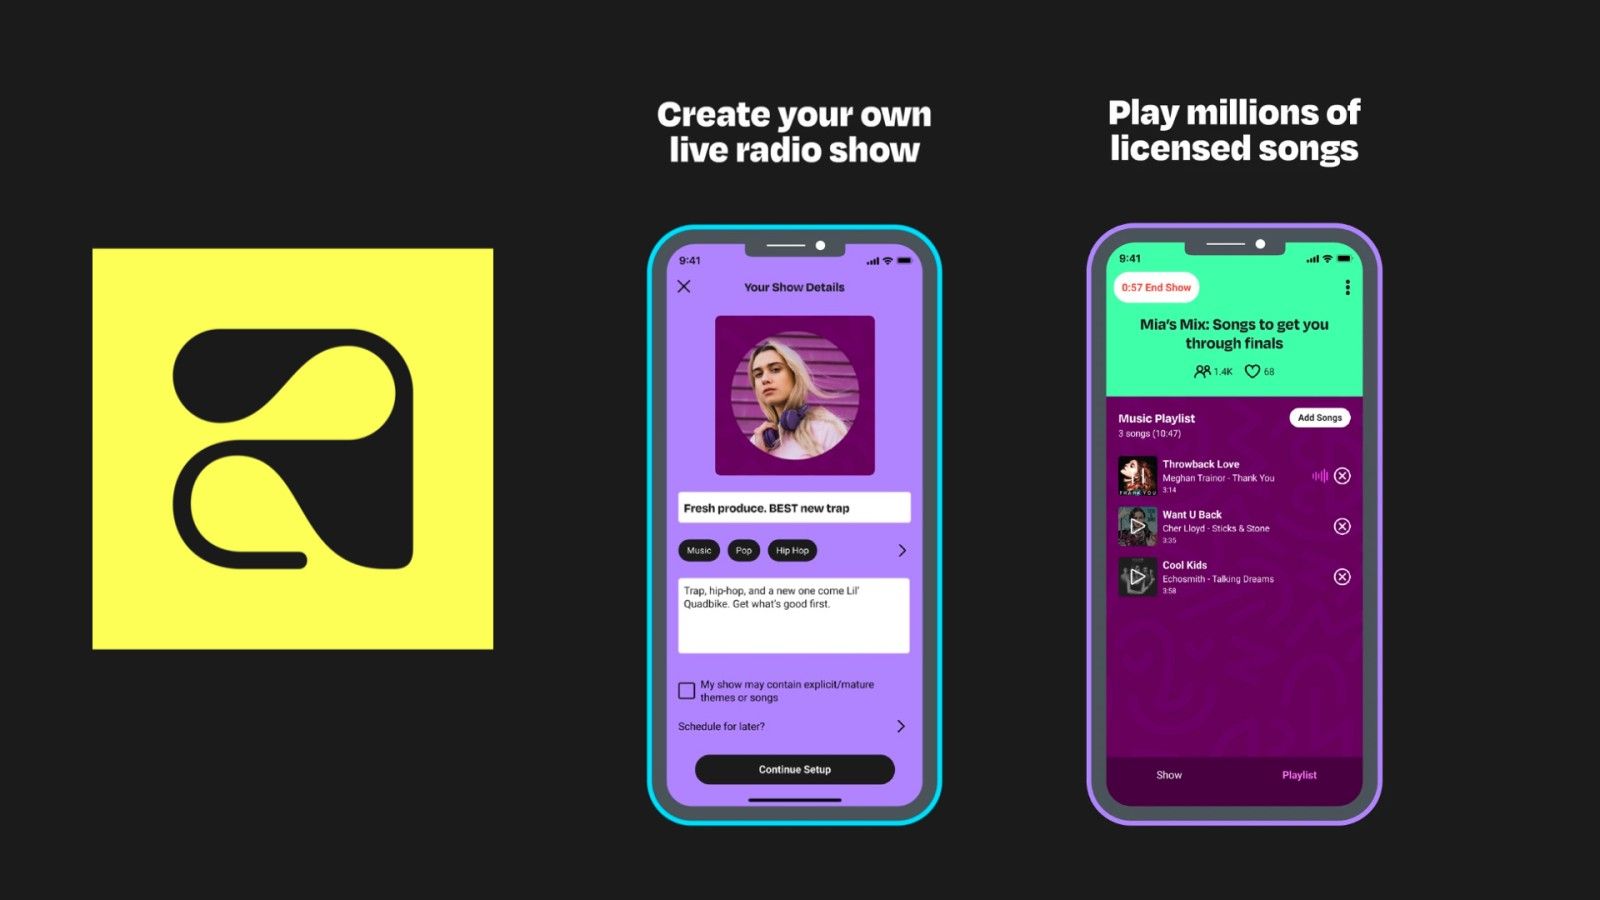 Amazon Launches App To Host Live Radio Shows And Listen To Music